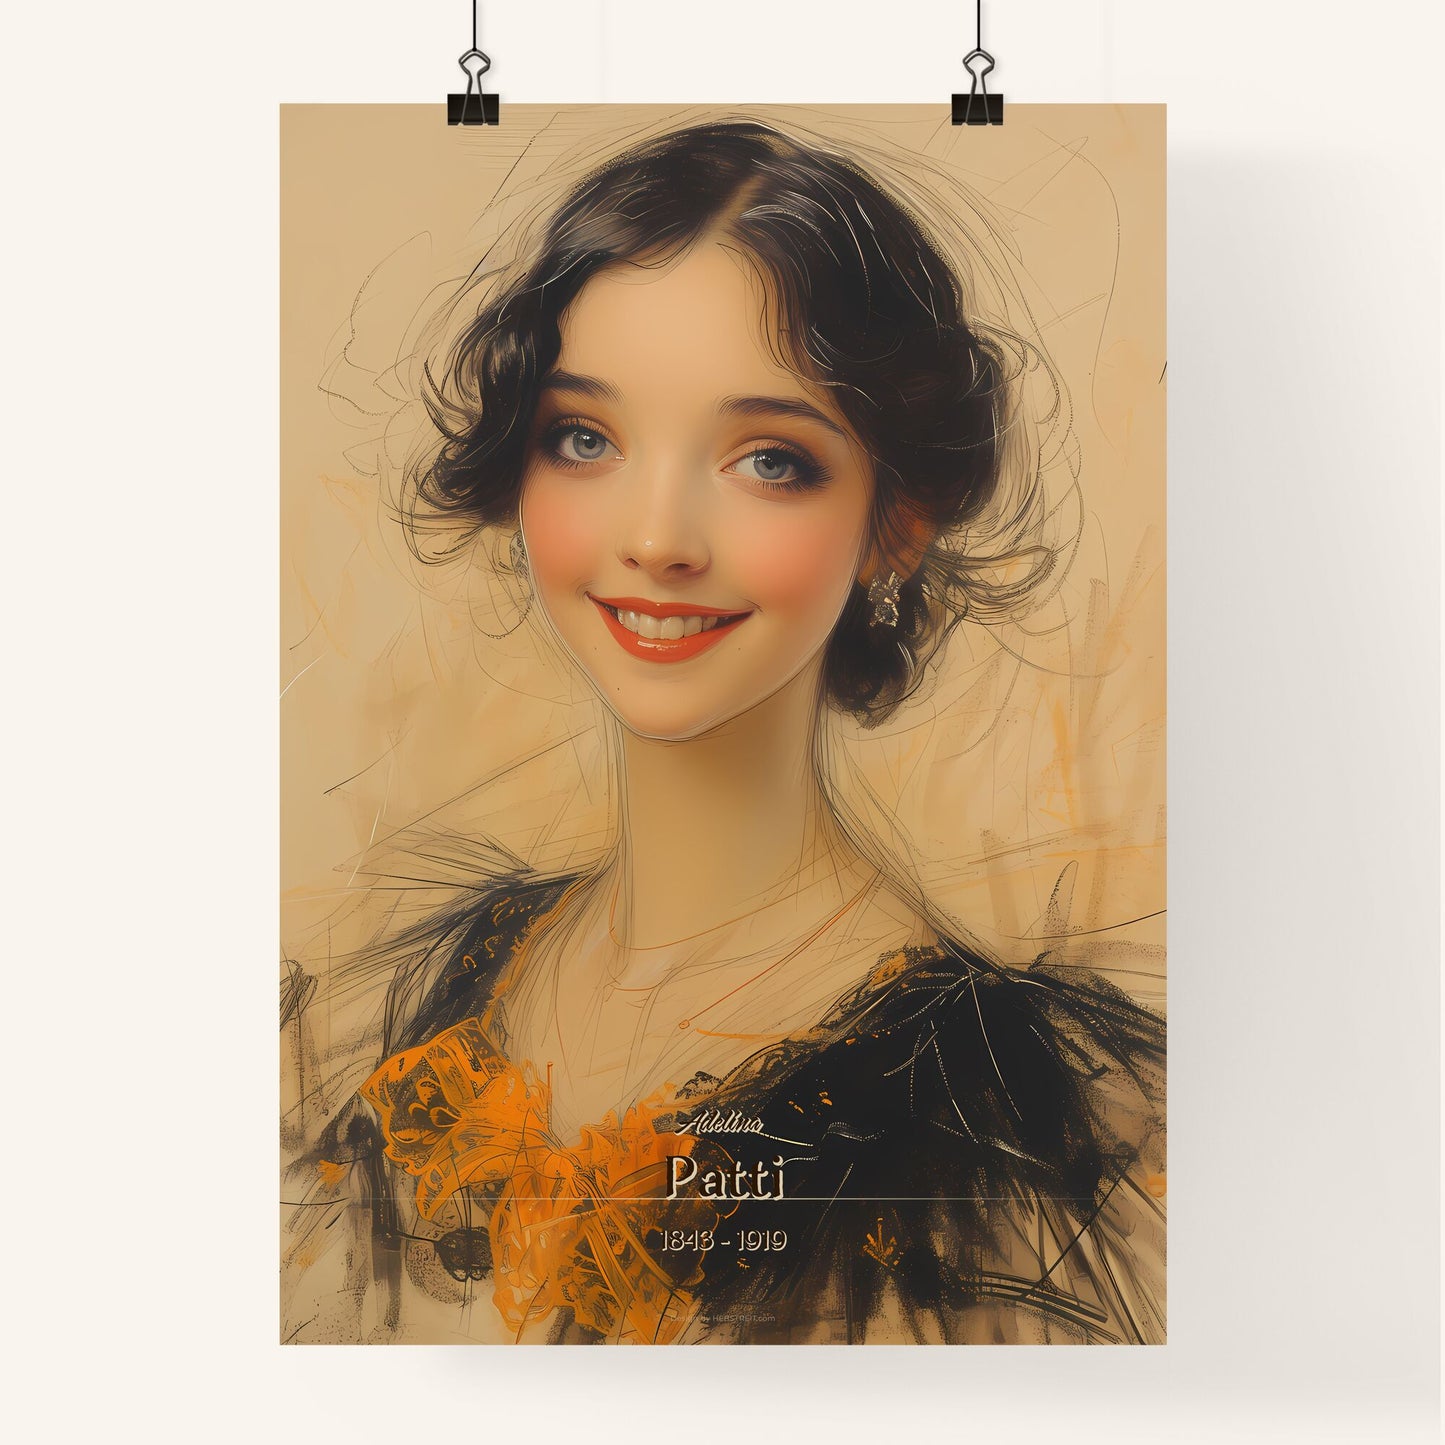 Adelina, Patti, 1843 - 1919, A Poster of a woman with a black and orange dress Default Title